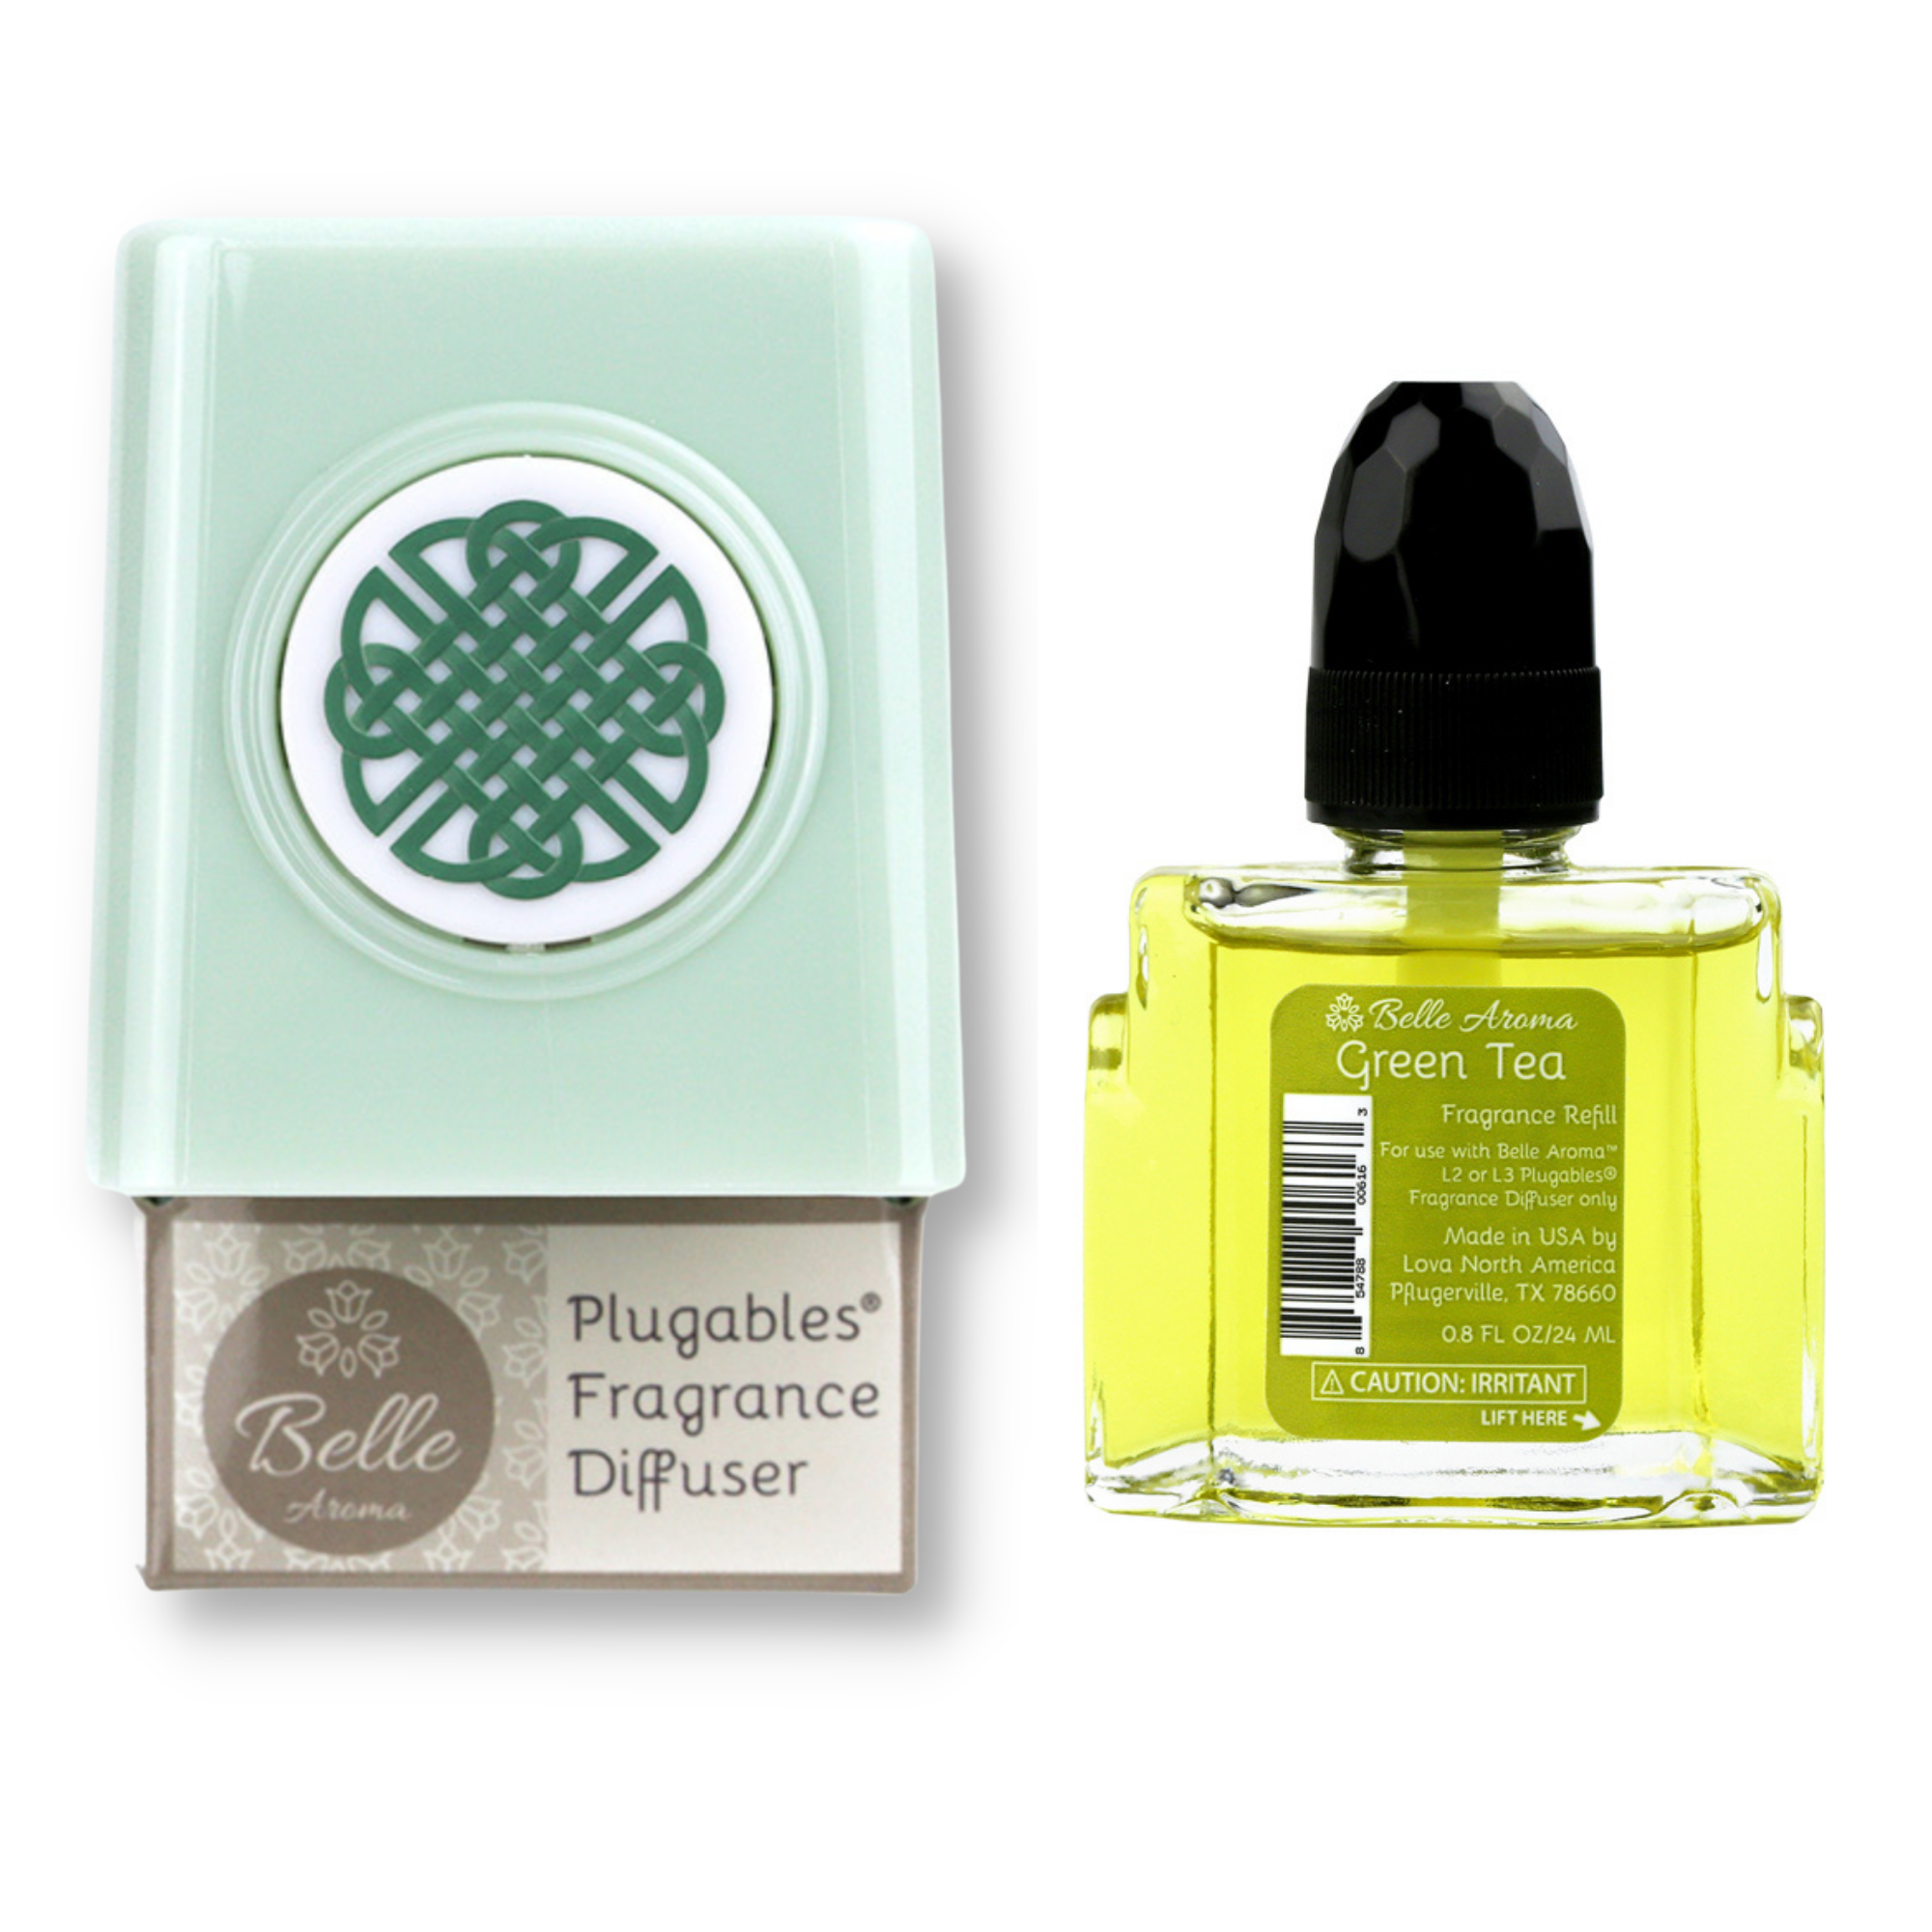 Celtic Knot Medallion Plugables® Plugin Aromalectric® Scented Oil Diffuser - Sea Glass with Green Tea Fragrance Oil Home Fragrance Accessories